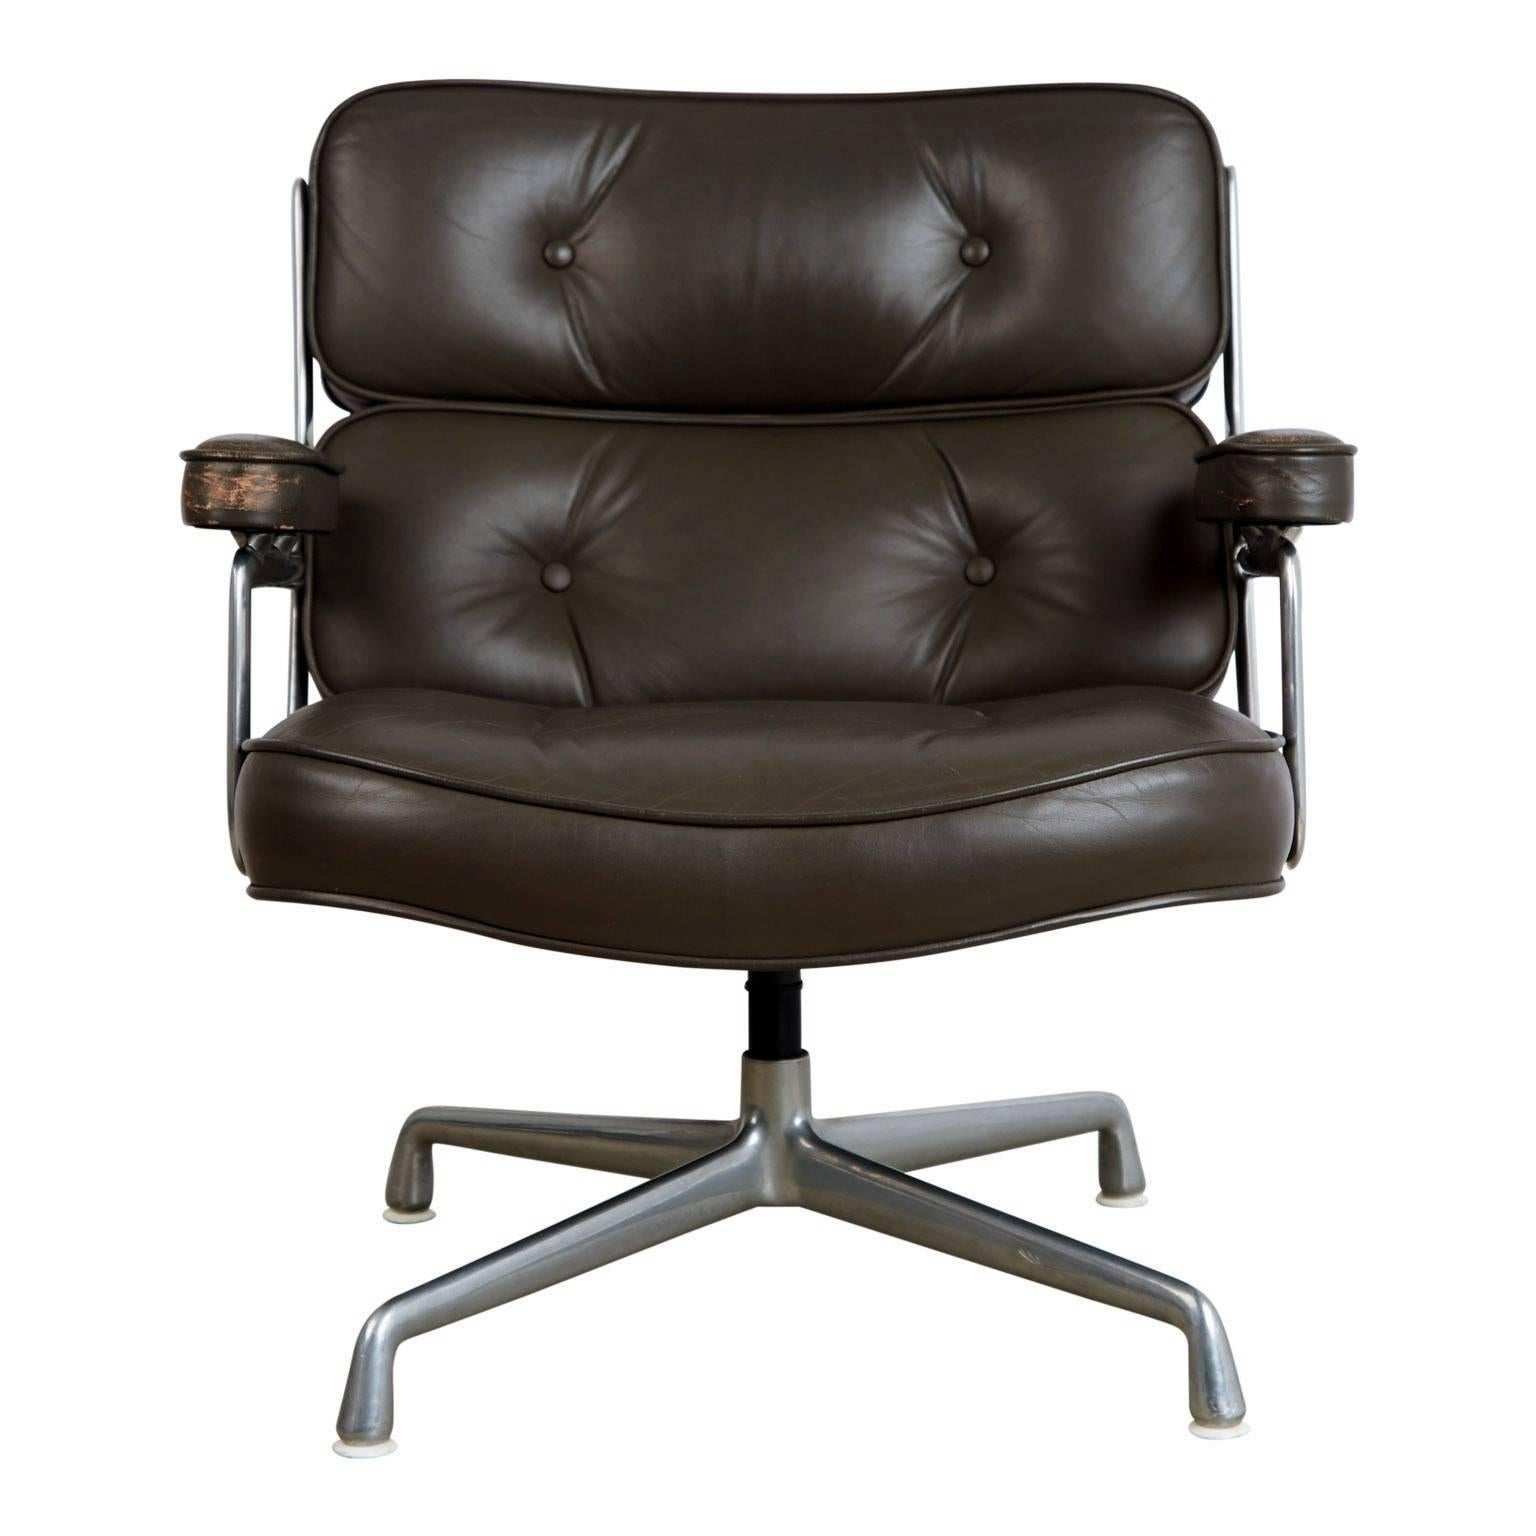 Mid-Century Modern Dark Grey Time Life Lobby Lounge Chairs by Charles Eames for Herman Miller 